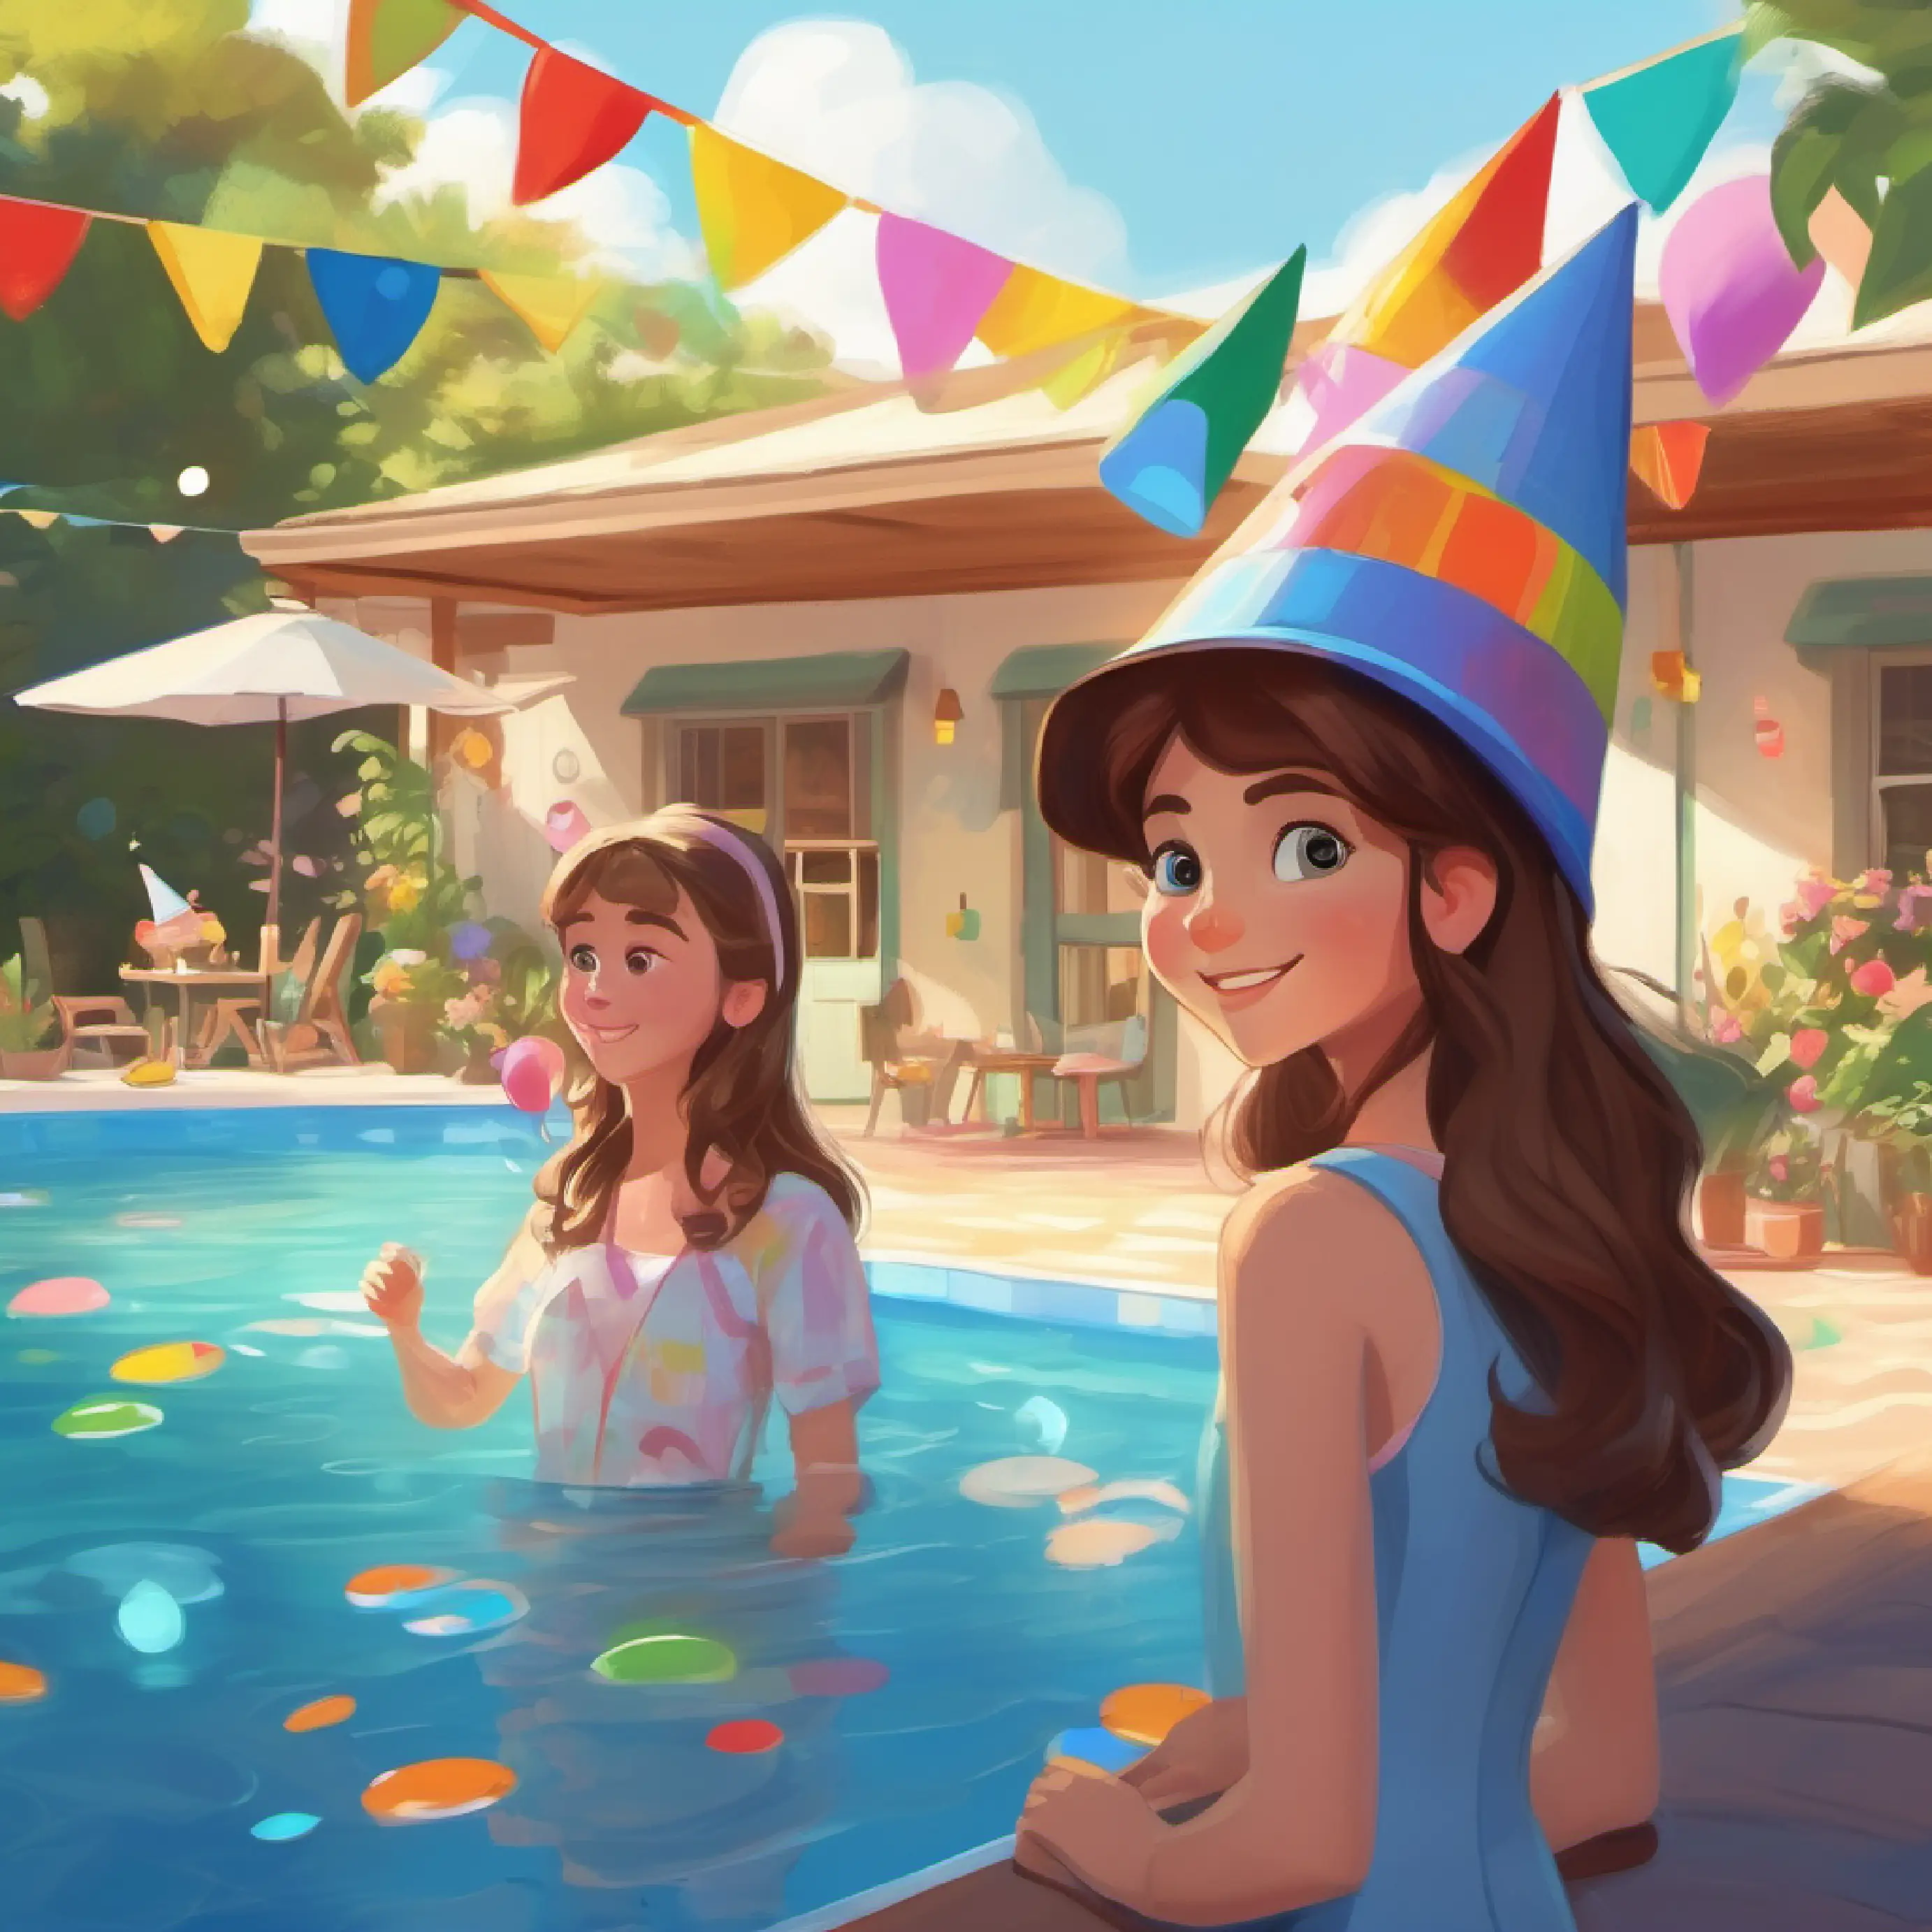 Setting up the pool outside, Girl with brown hair, blue eyes, wearing a party hat's mom is present.